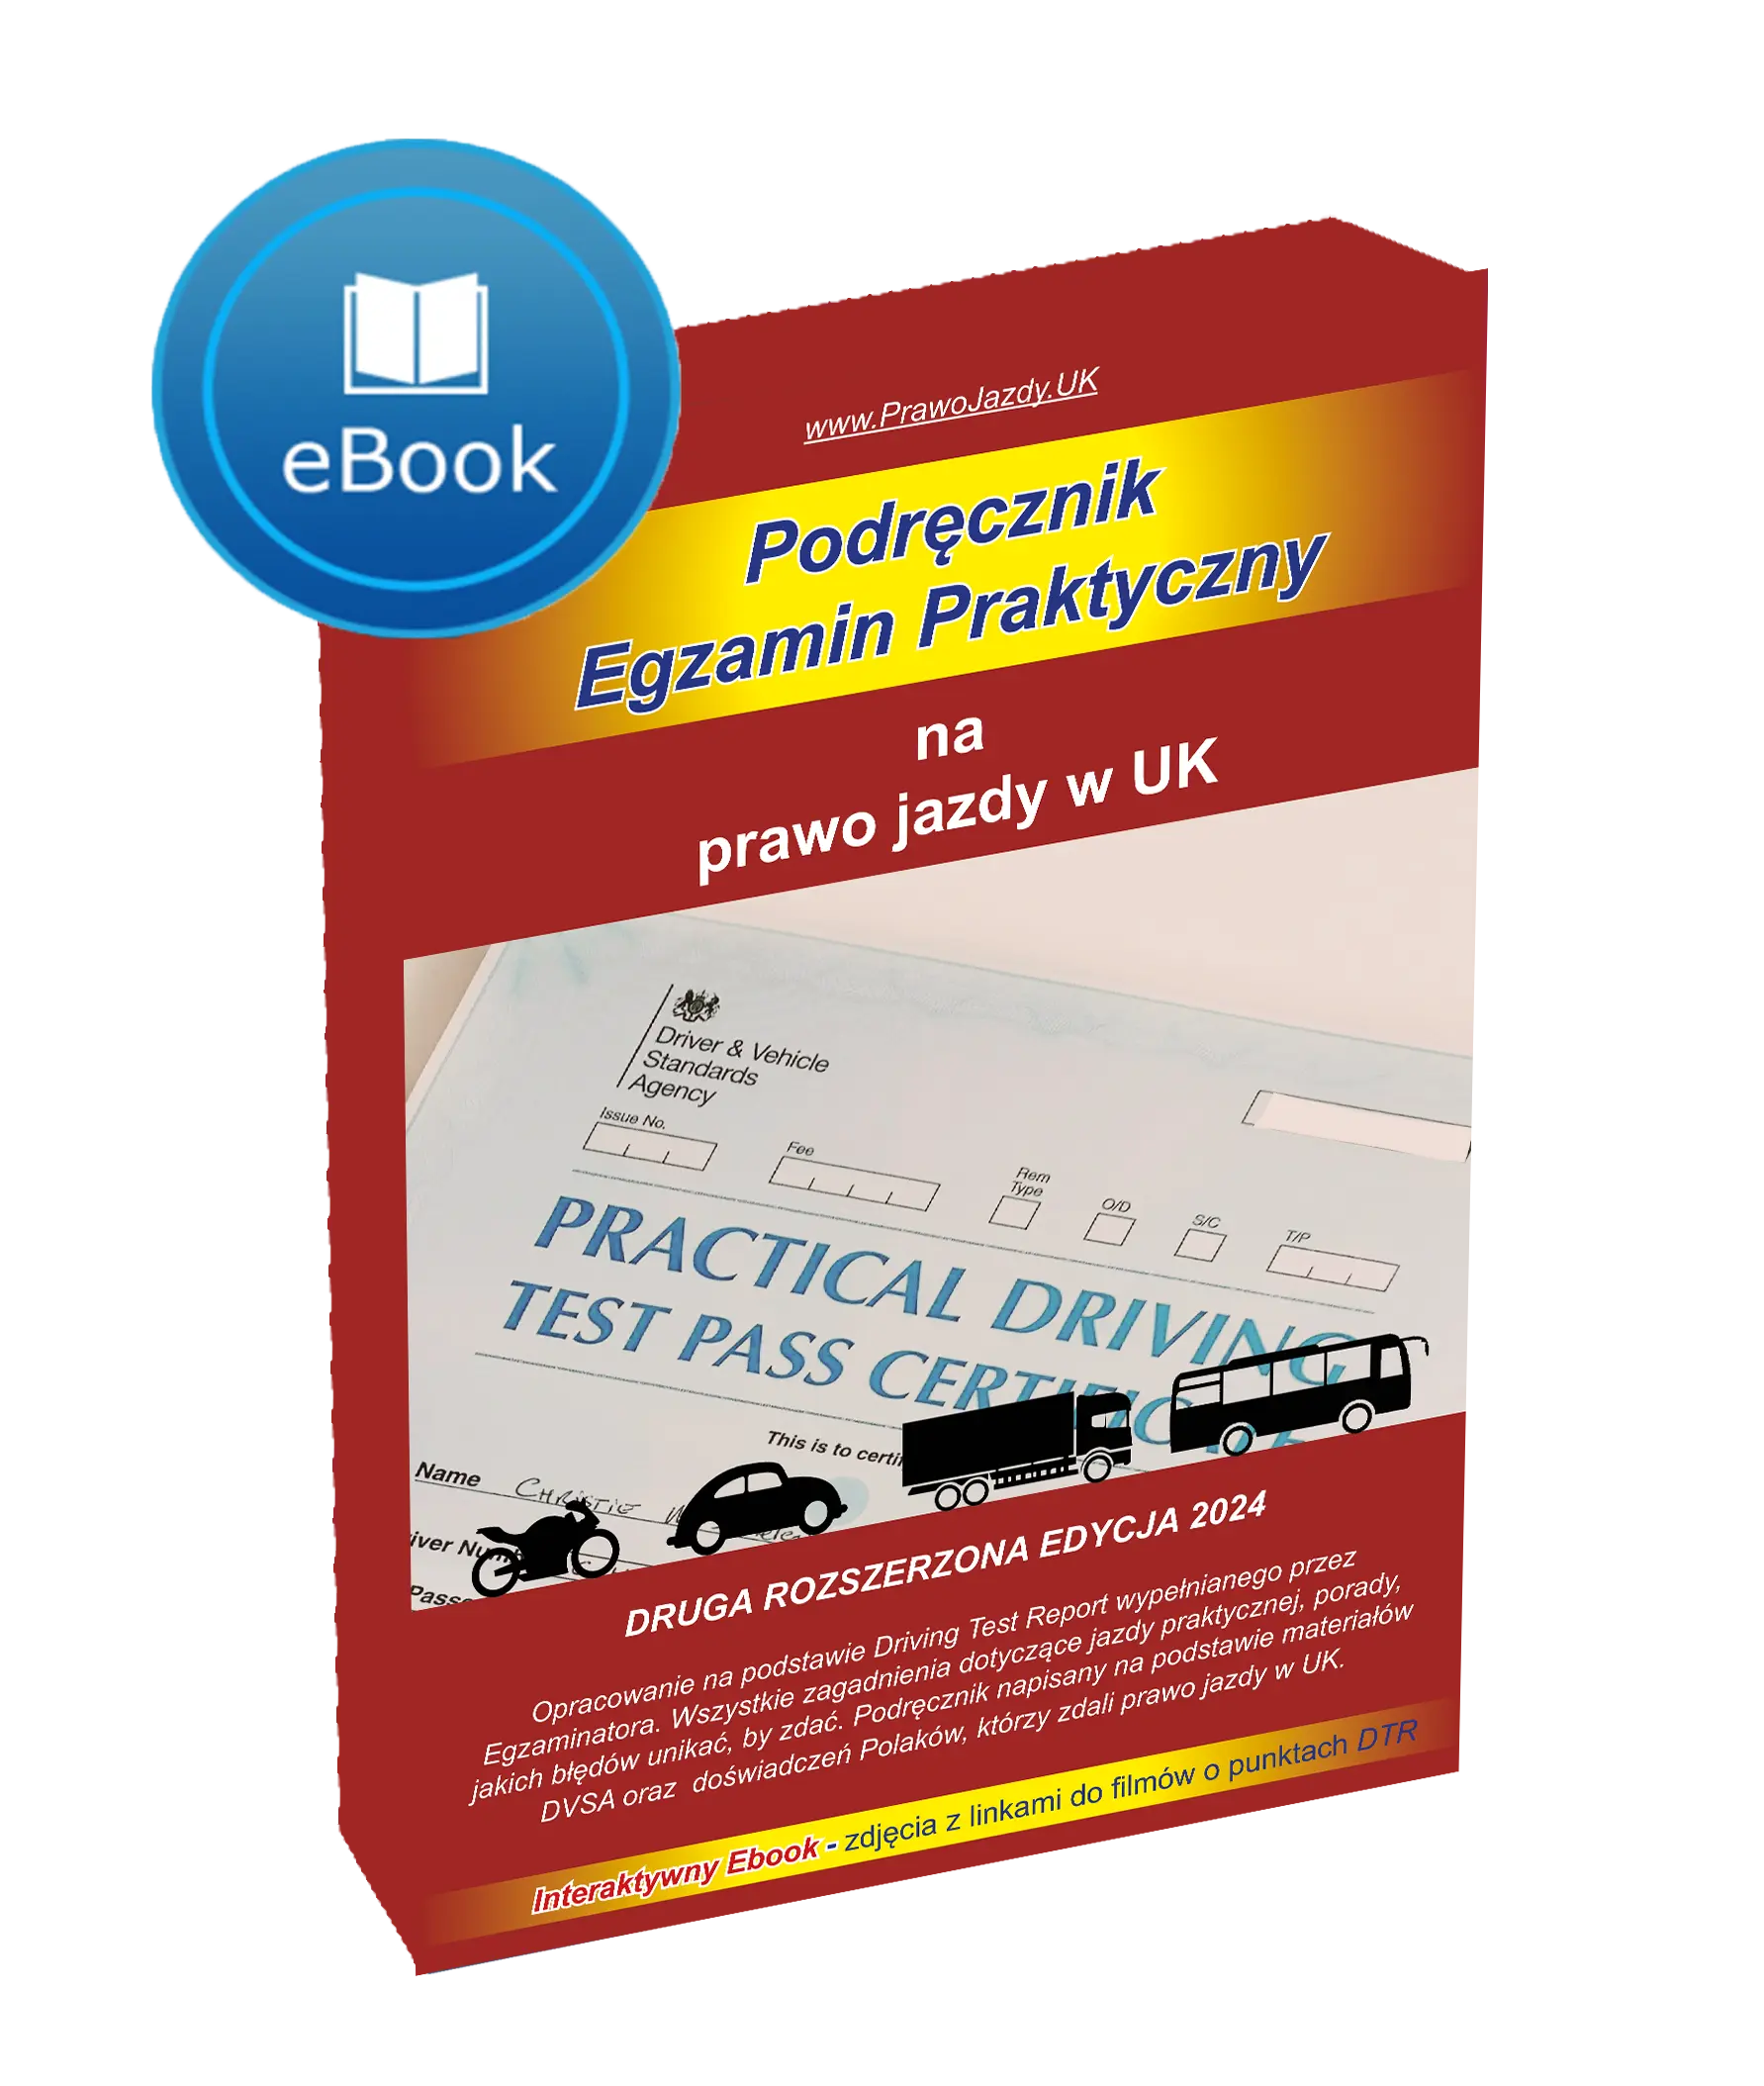 Practical driving exam test in Polish translator voice over